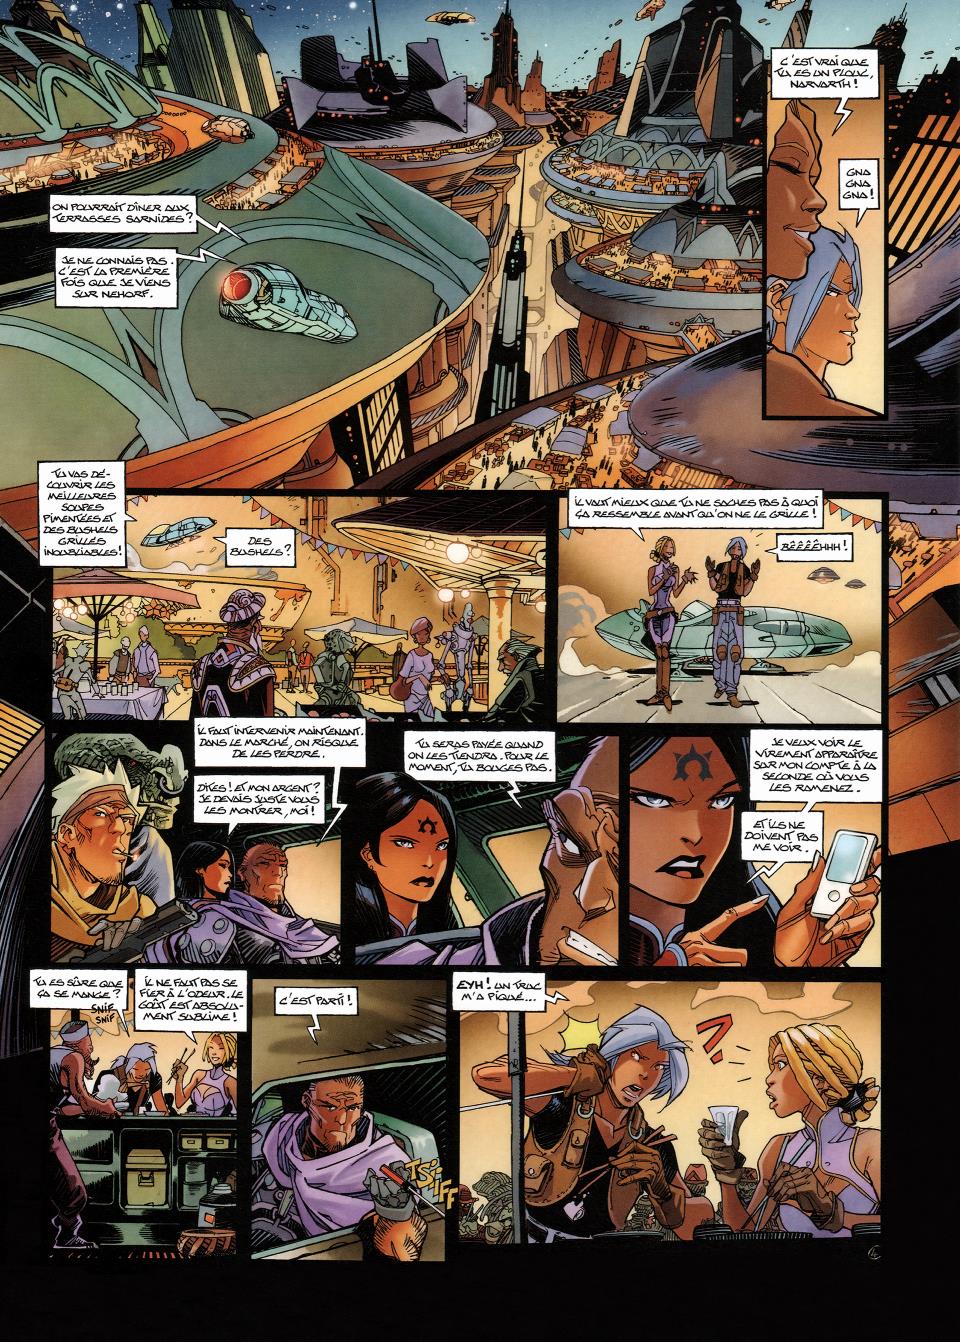 Les Naufrages dYthaq - Tome 10 - Nehorf-Capitol Transit numero d'image 6